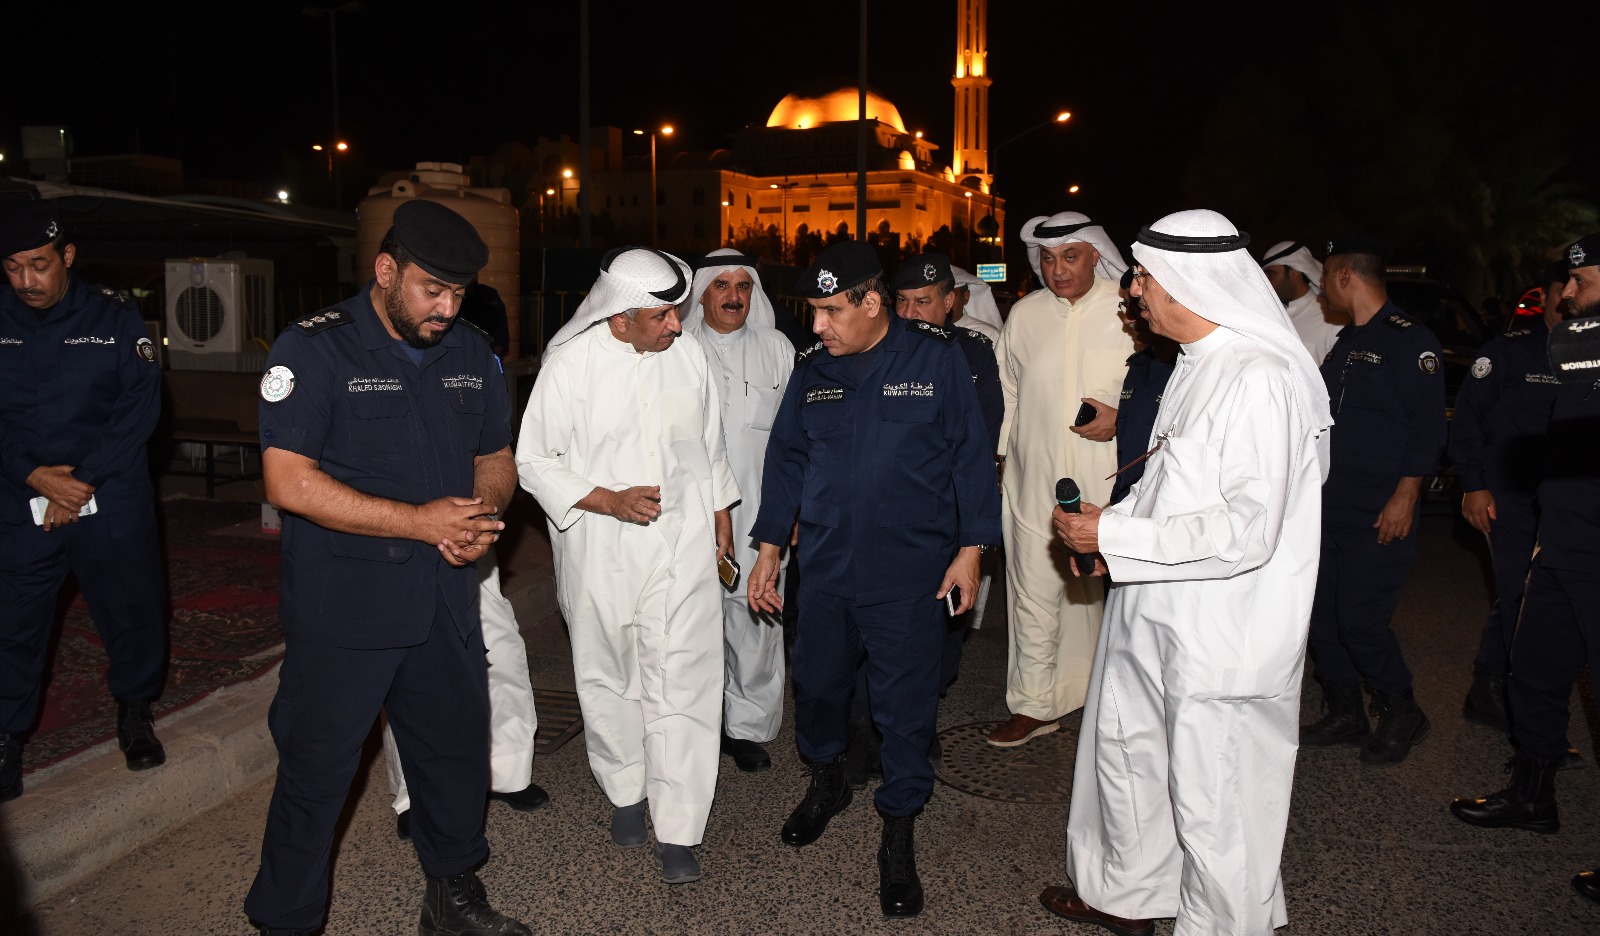 Undersecretary Lieutenant General Essam Al-Naham accompanied by Assistant Undersecretary for Operations Major-General Jamal Al-Sayegh during their inspection tour to several Husseiniyas and condolence places